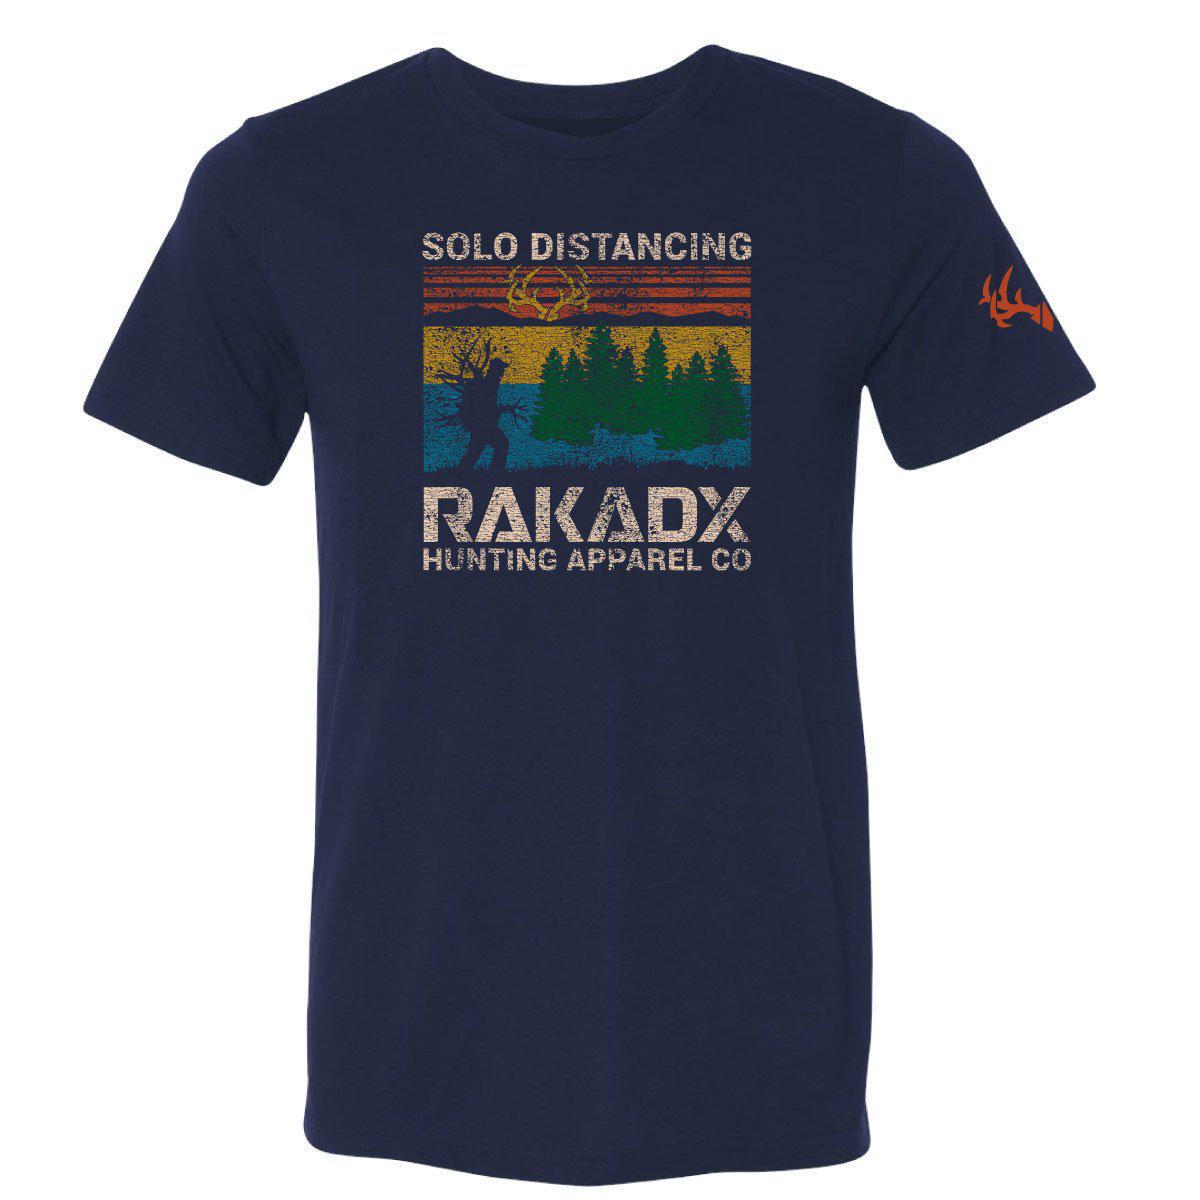 Solo Distancing Tee